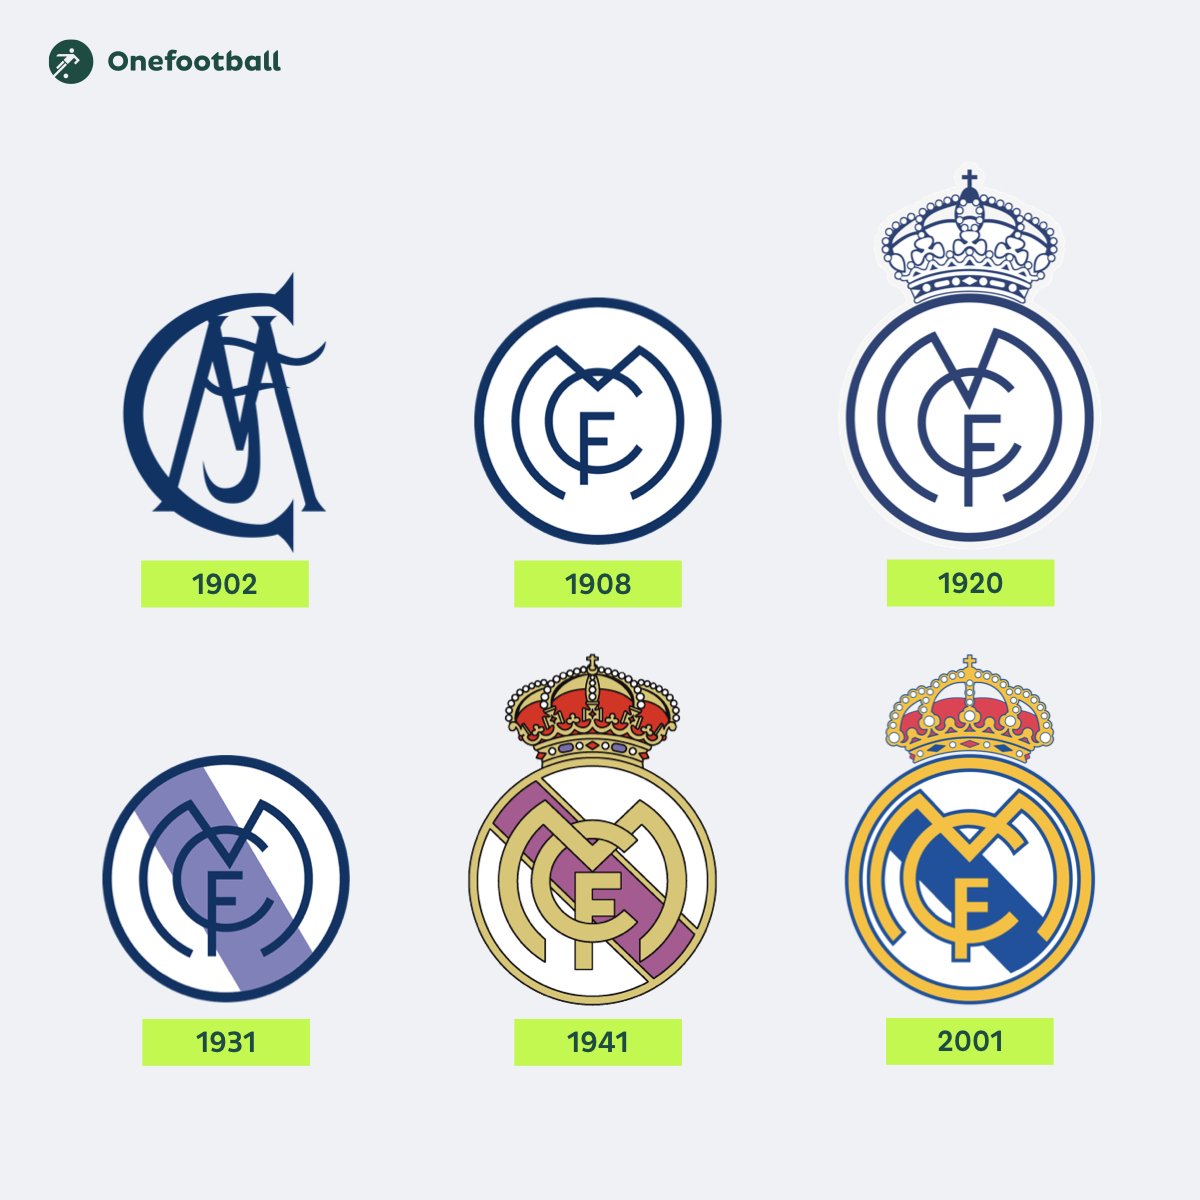 Real Madrid of the future: Evolution, not revolution